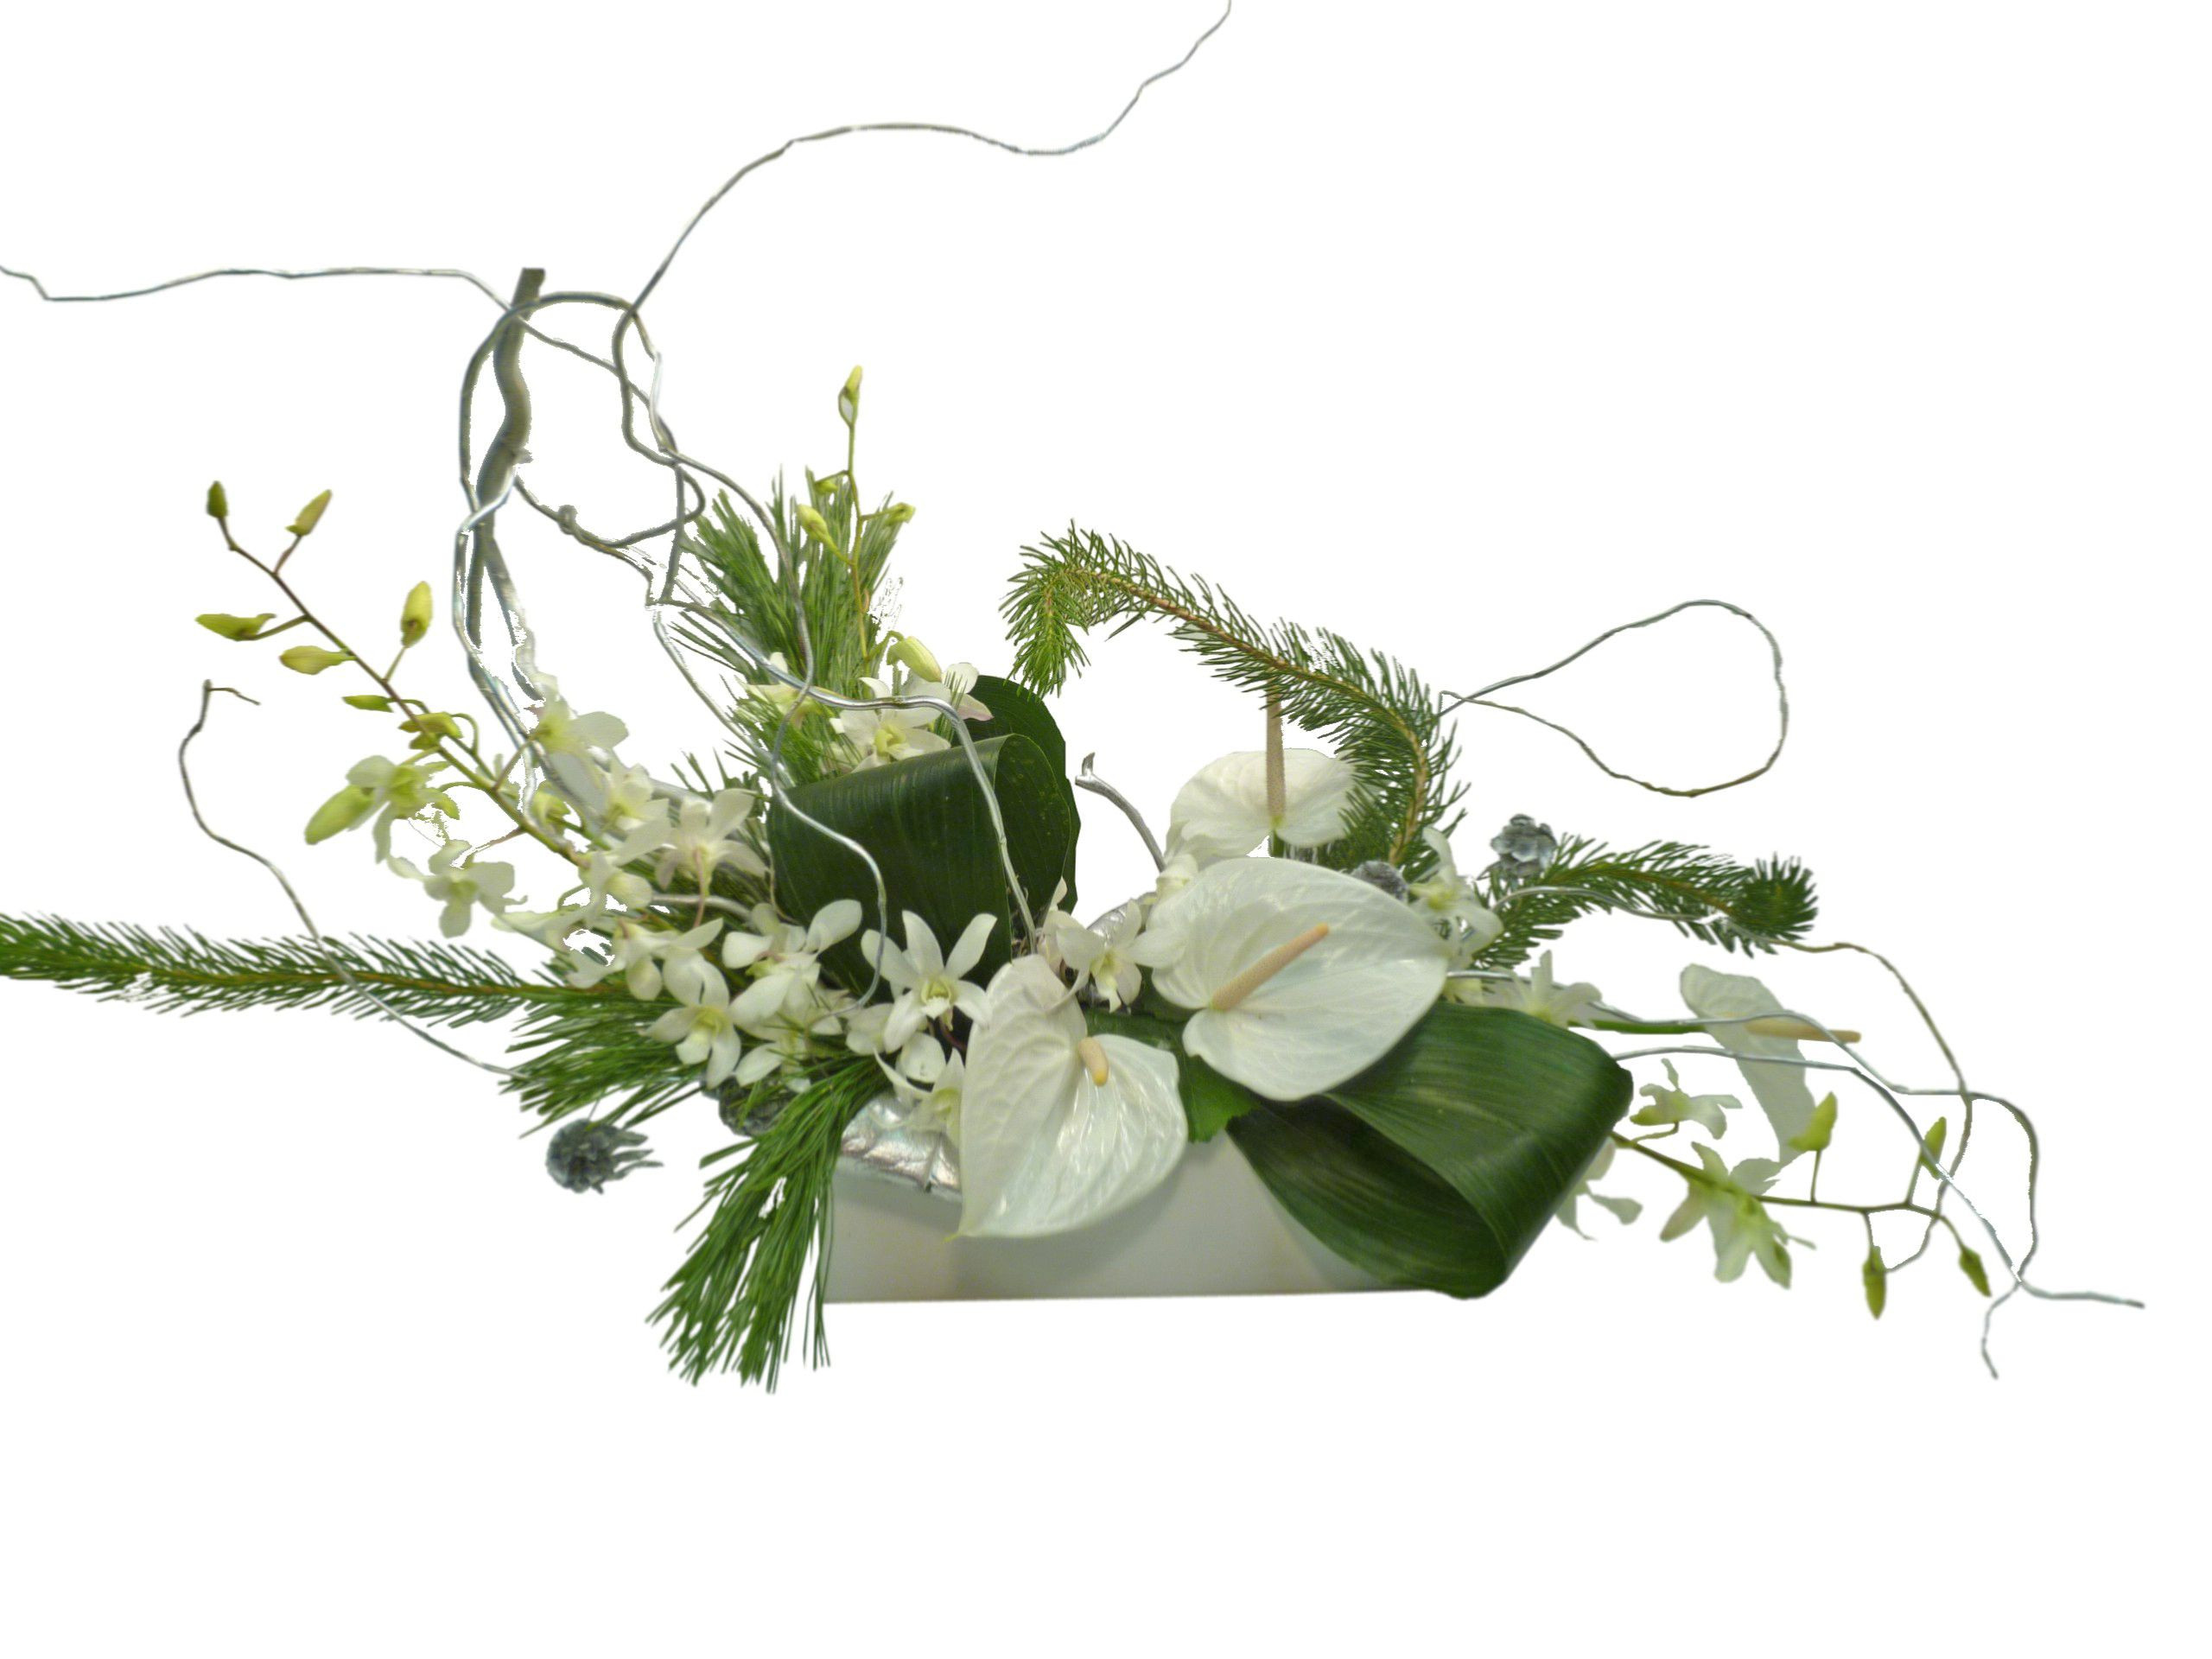 19 Lovable Tree Branch Vase 2023 free download tree branch vase of 31 modern vase and gift the weekly world in flower arrangements ideas modern flowers healthy